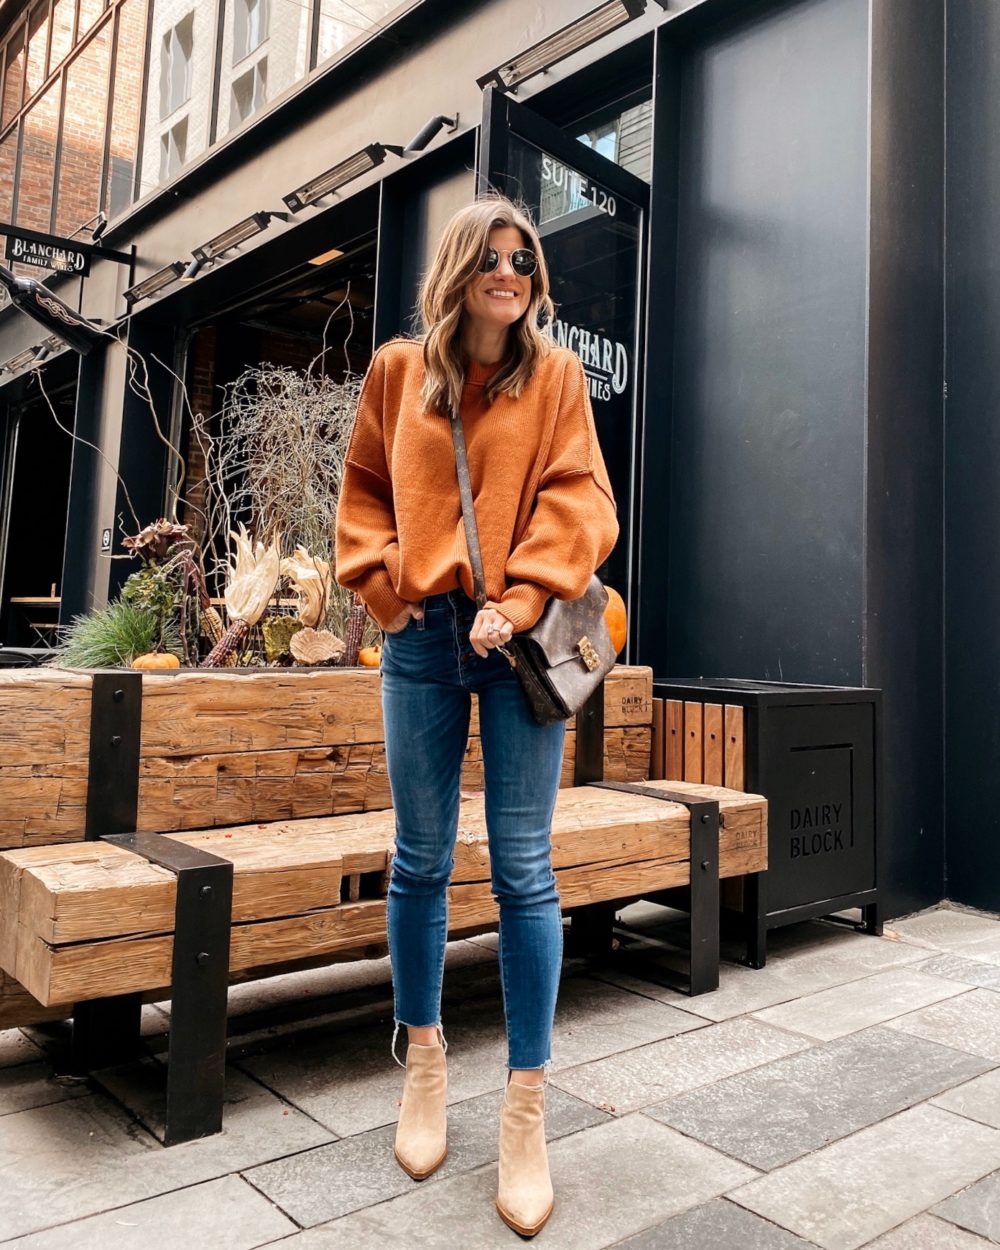 brighton keller wearing burnt orange rust tunic with jeans and booties